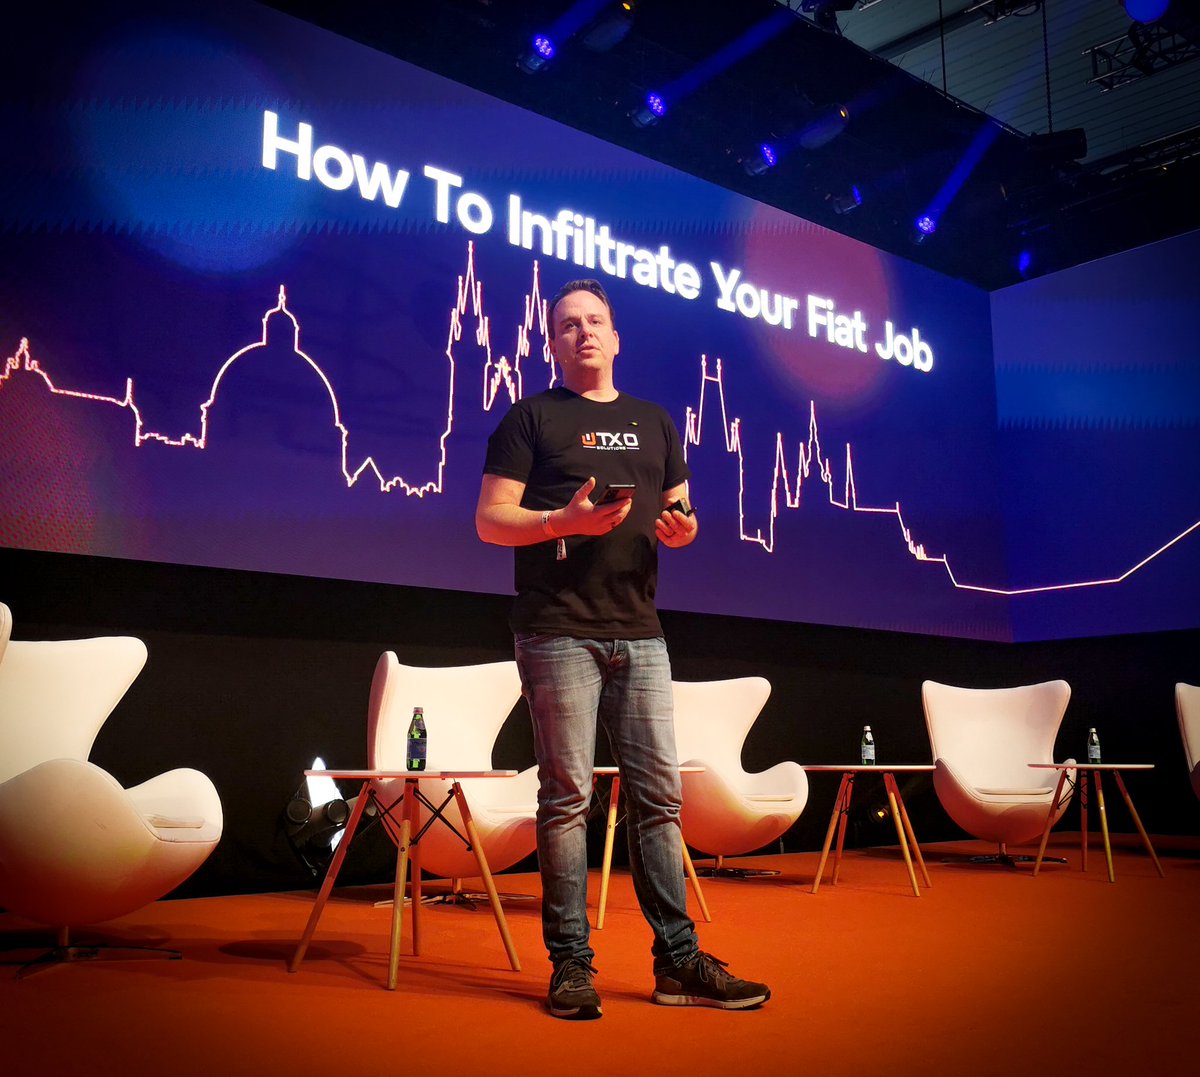 Did you infiltrate your Fiat job already? 😉🎉👀
@danielwingen did rock
the mainstage @BtcPrague